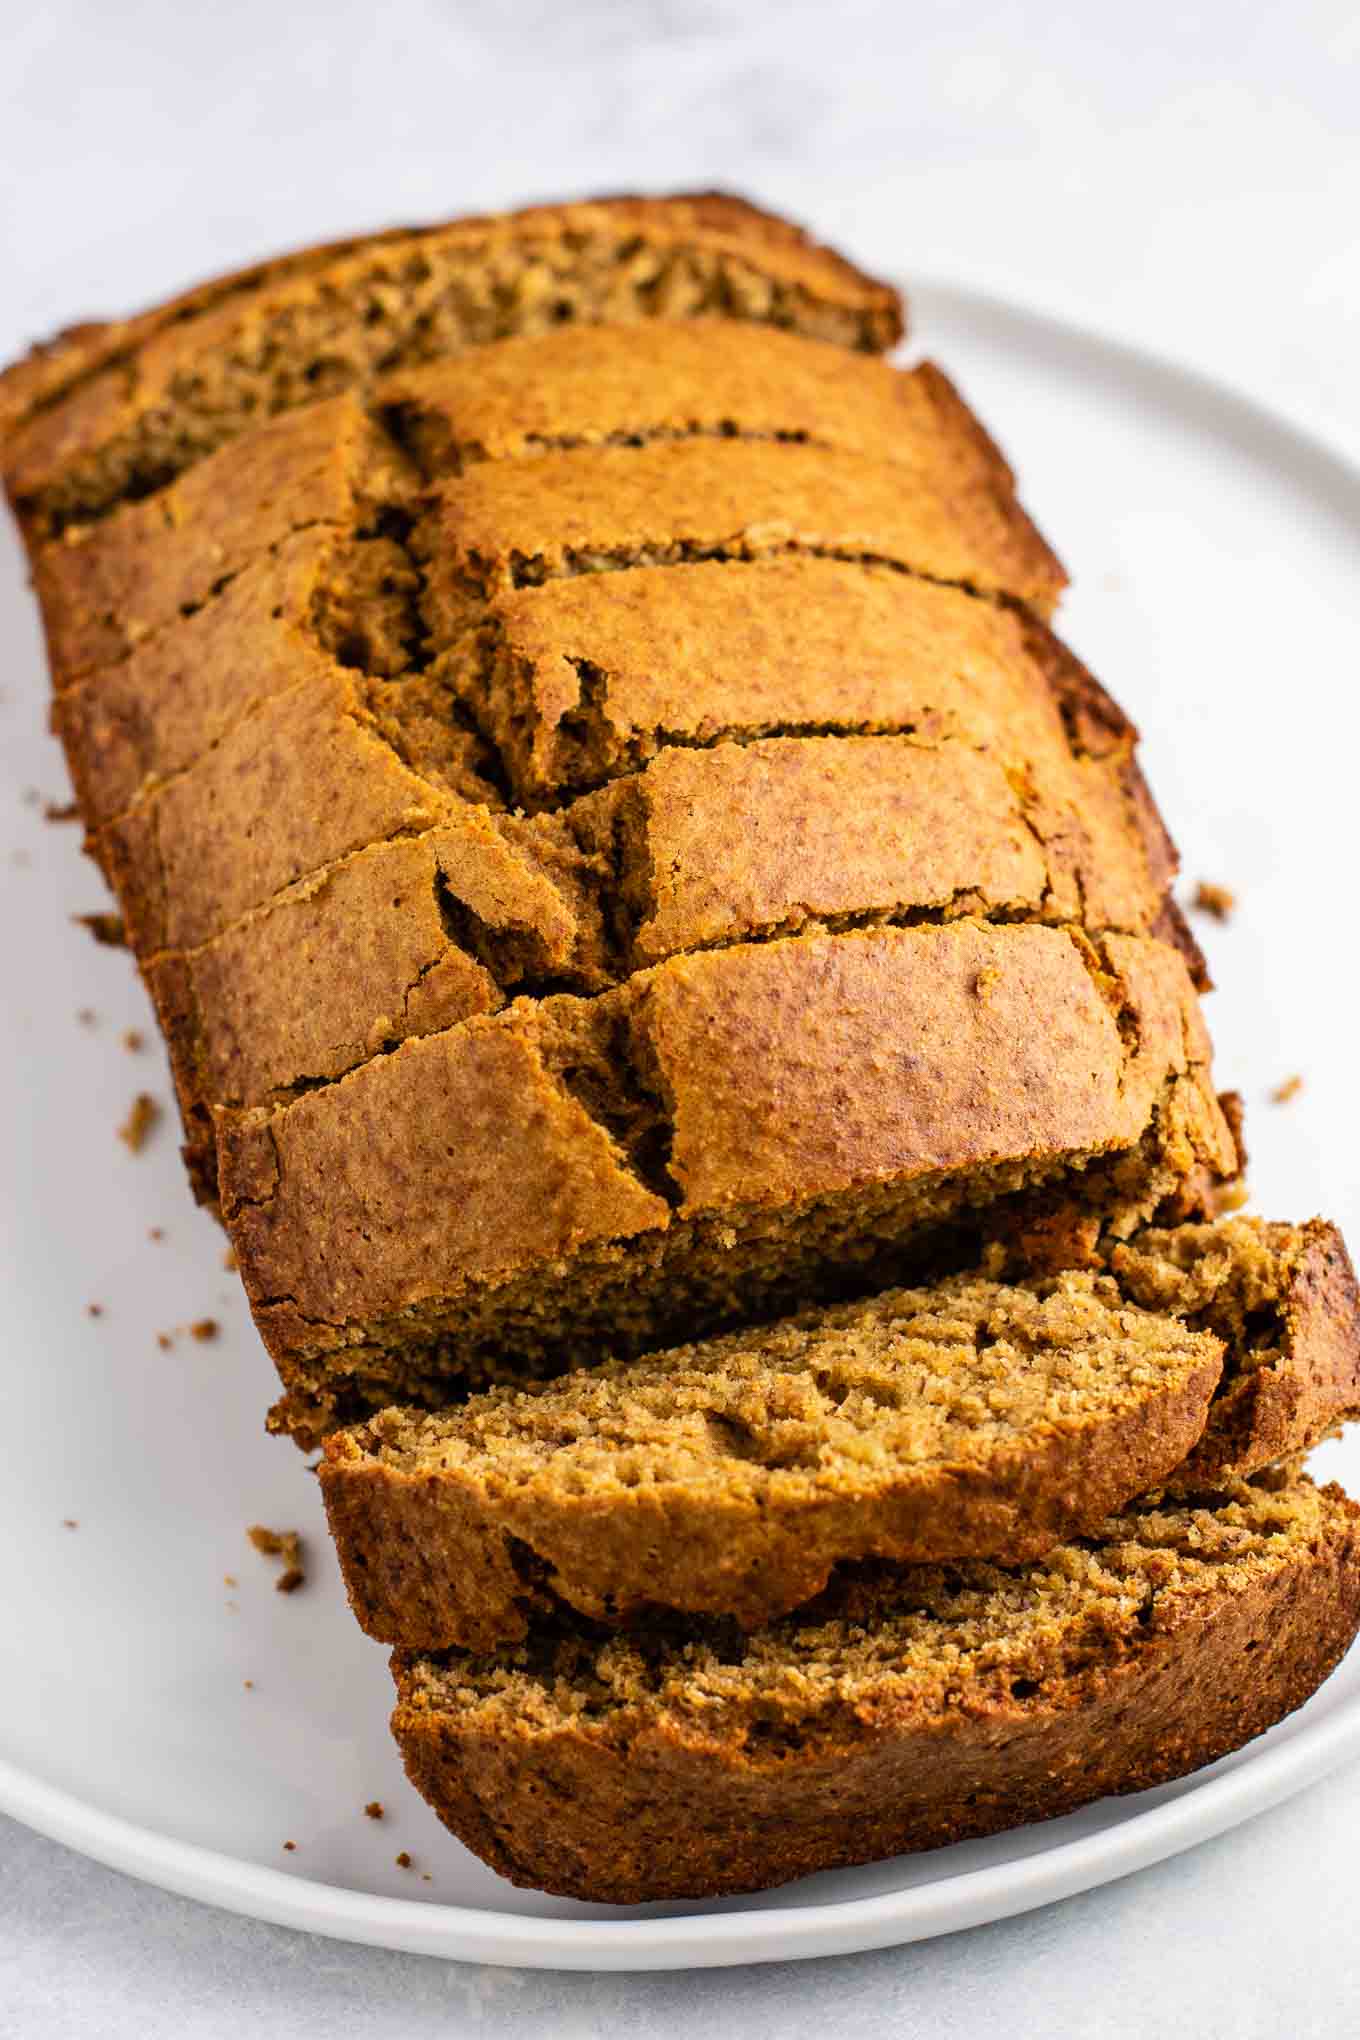 perfect whole wheat banana bread - banana bread with whole wheat flour. Oil free, dairy free, and so delicious! #bananabread #wholewheatbananabread #bananbreadrecipe #healthy #dairyfree #oilfree